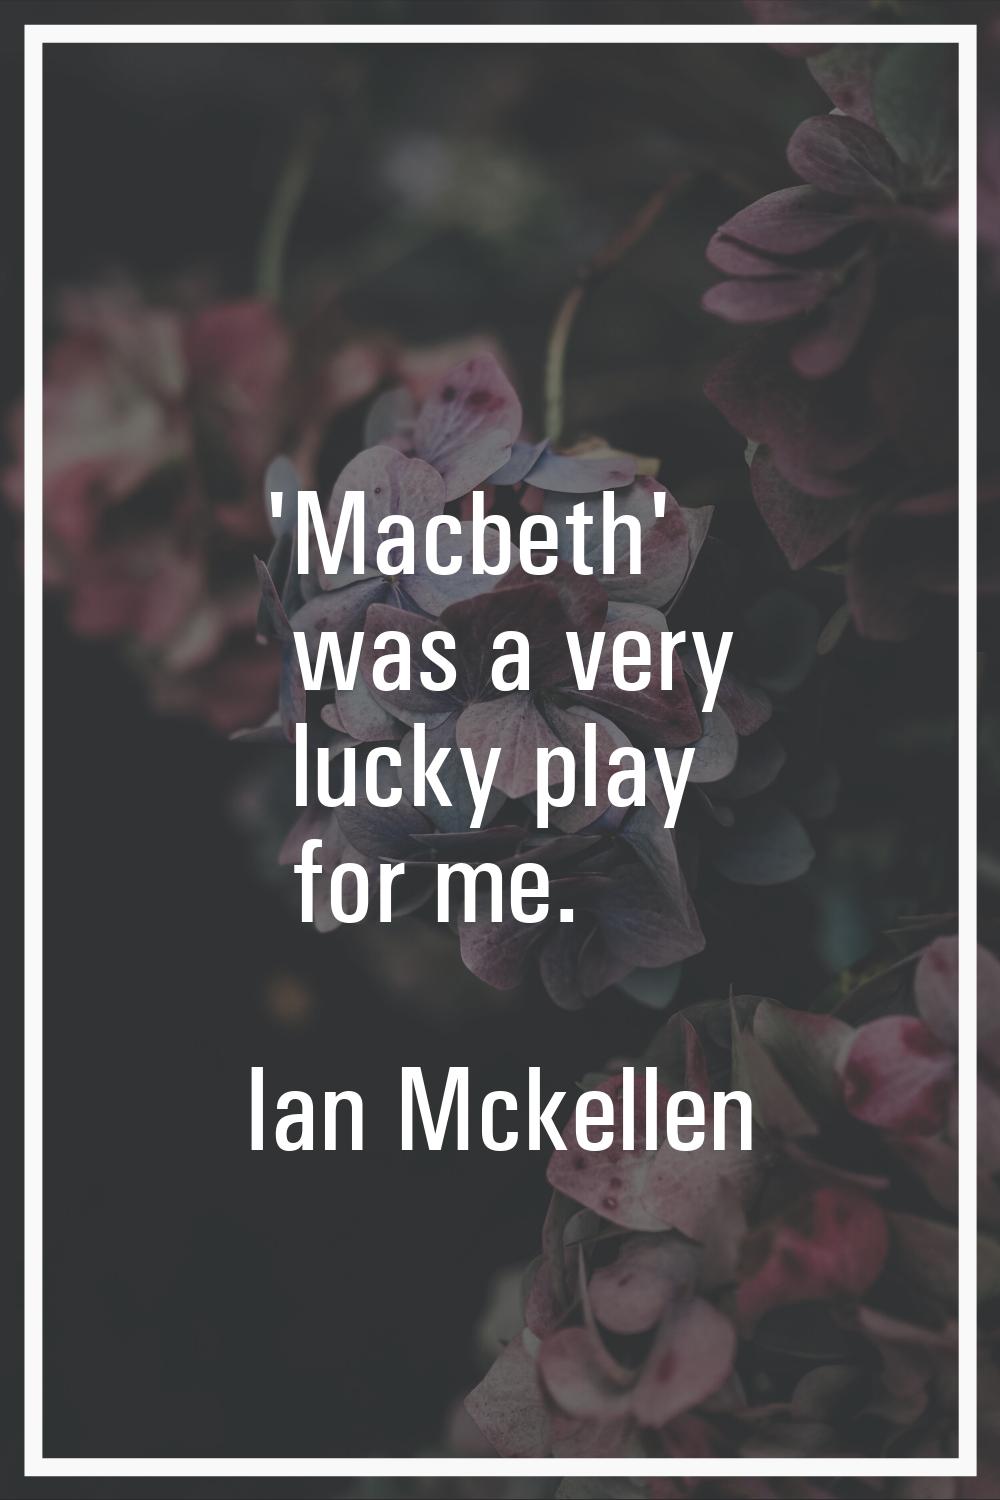 'Macbeth' was a very lucky play for me.